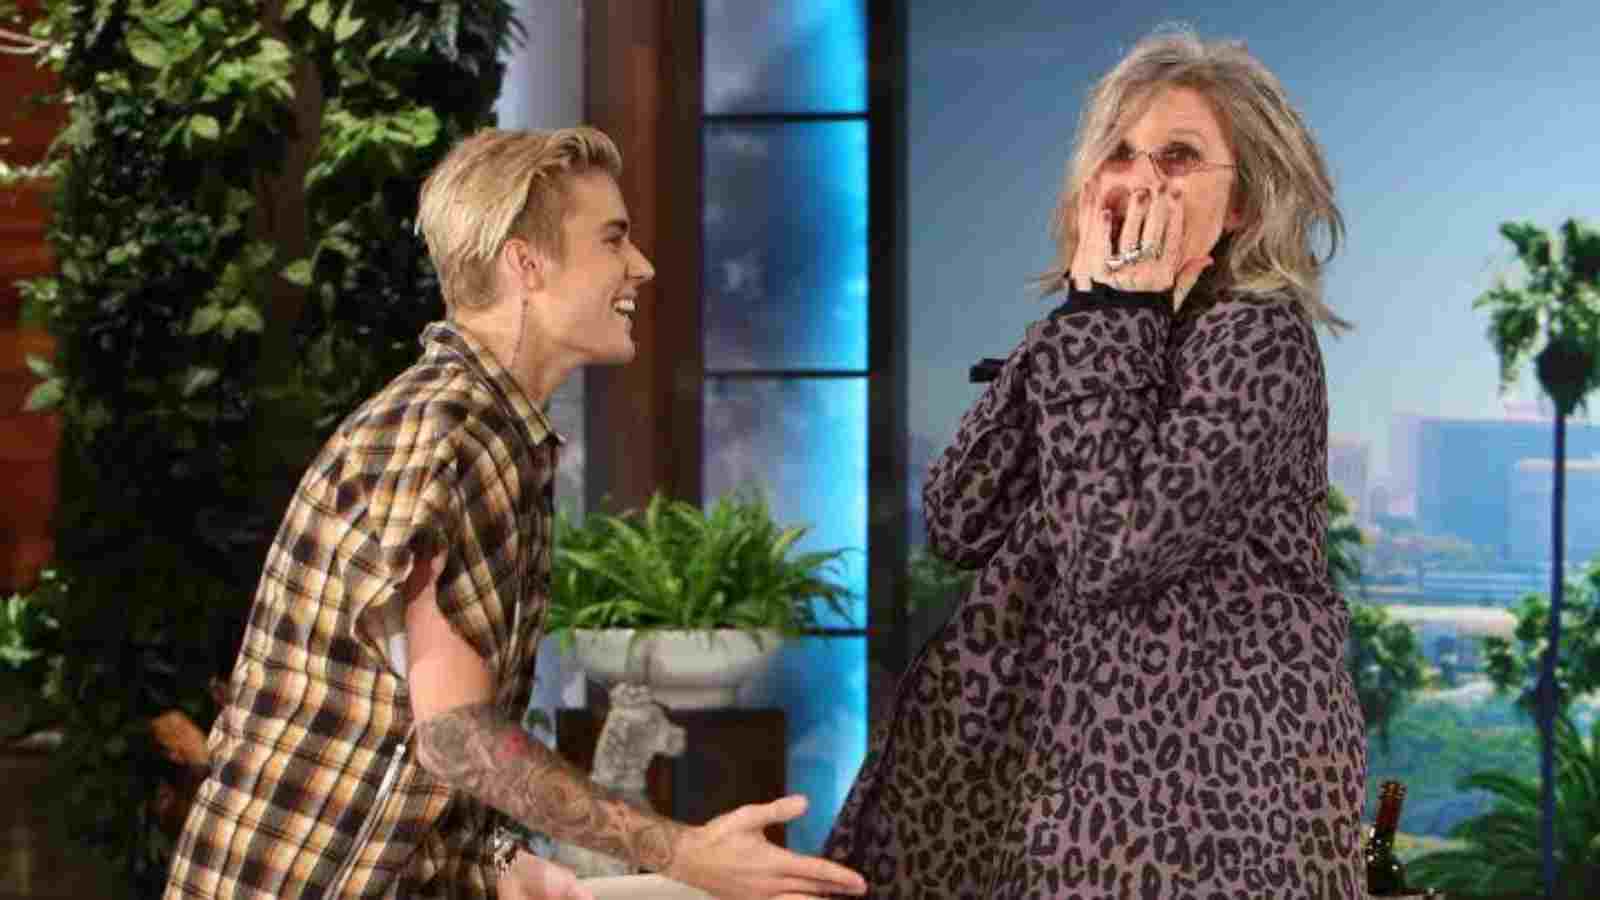 Justin Bieber and Diane Keaton's friendship can be traced back to 2015